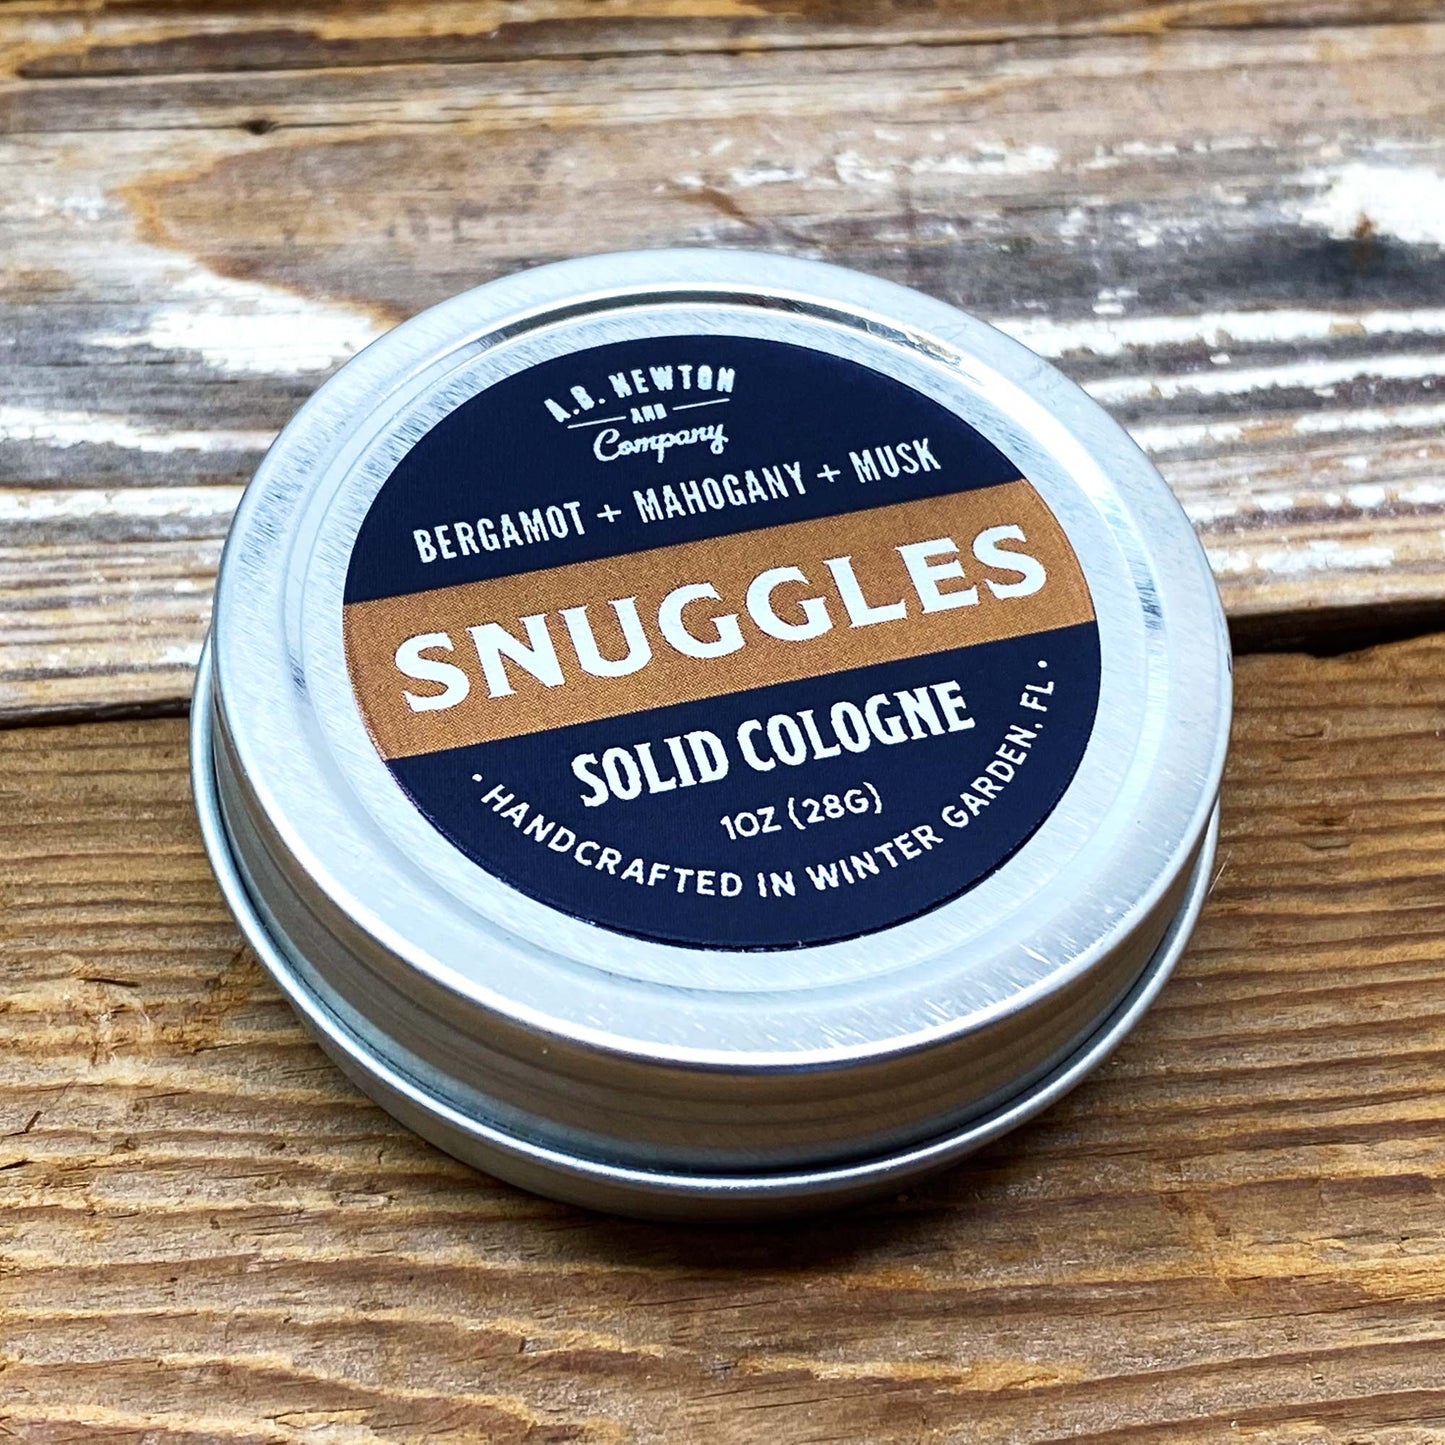 Snuggles Handcrafted All Natural Solid Cologne 1oz